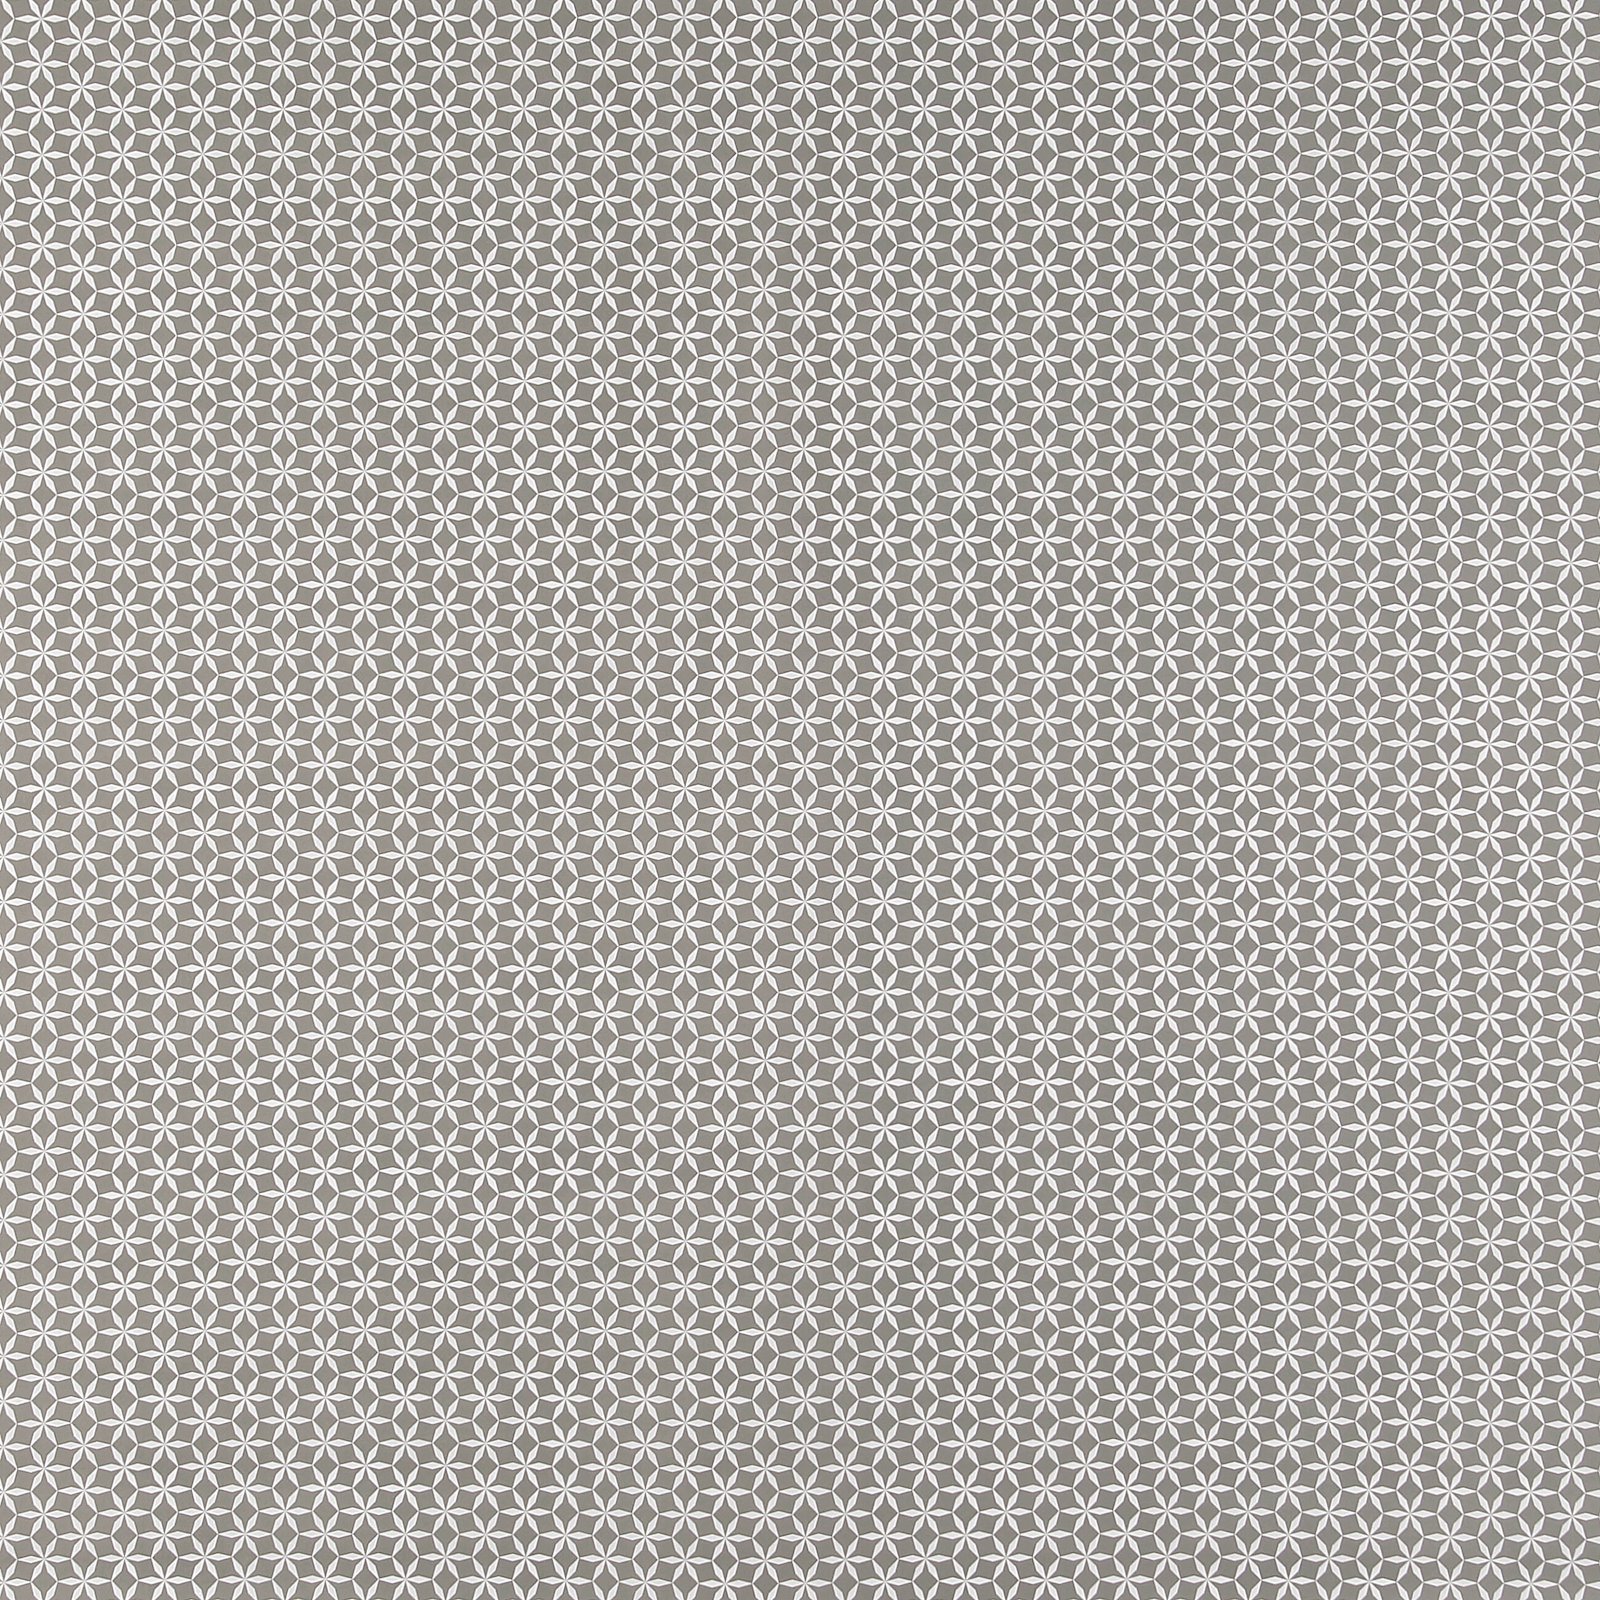 Non-woven oilcloth gray w origami star 866139_pack_sp